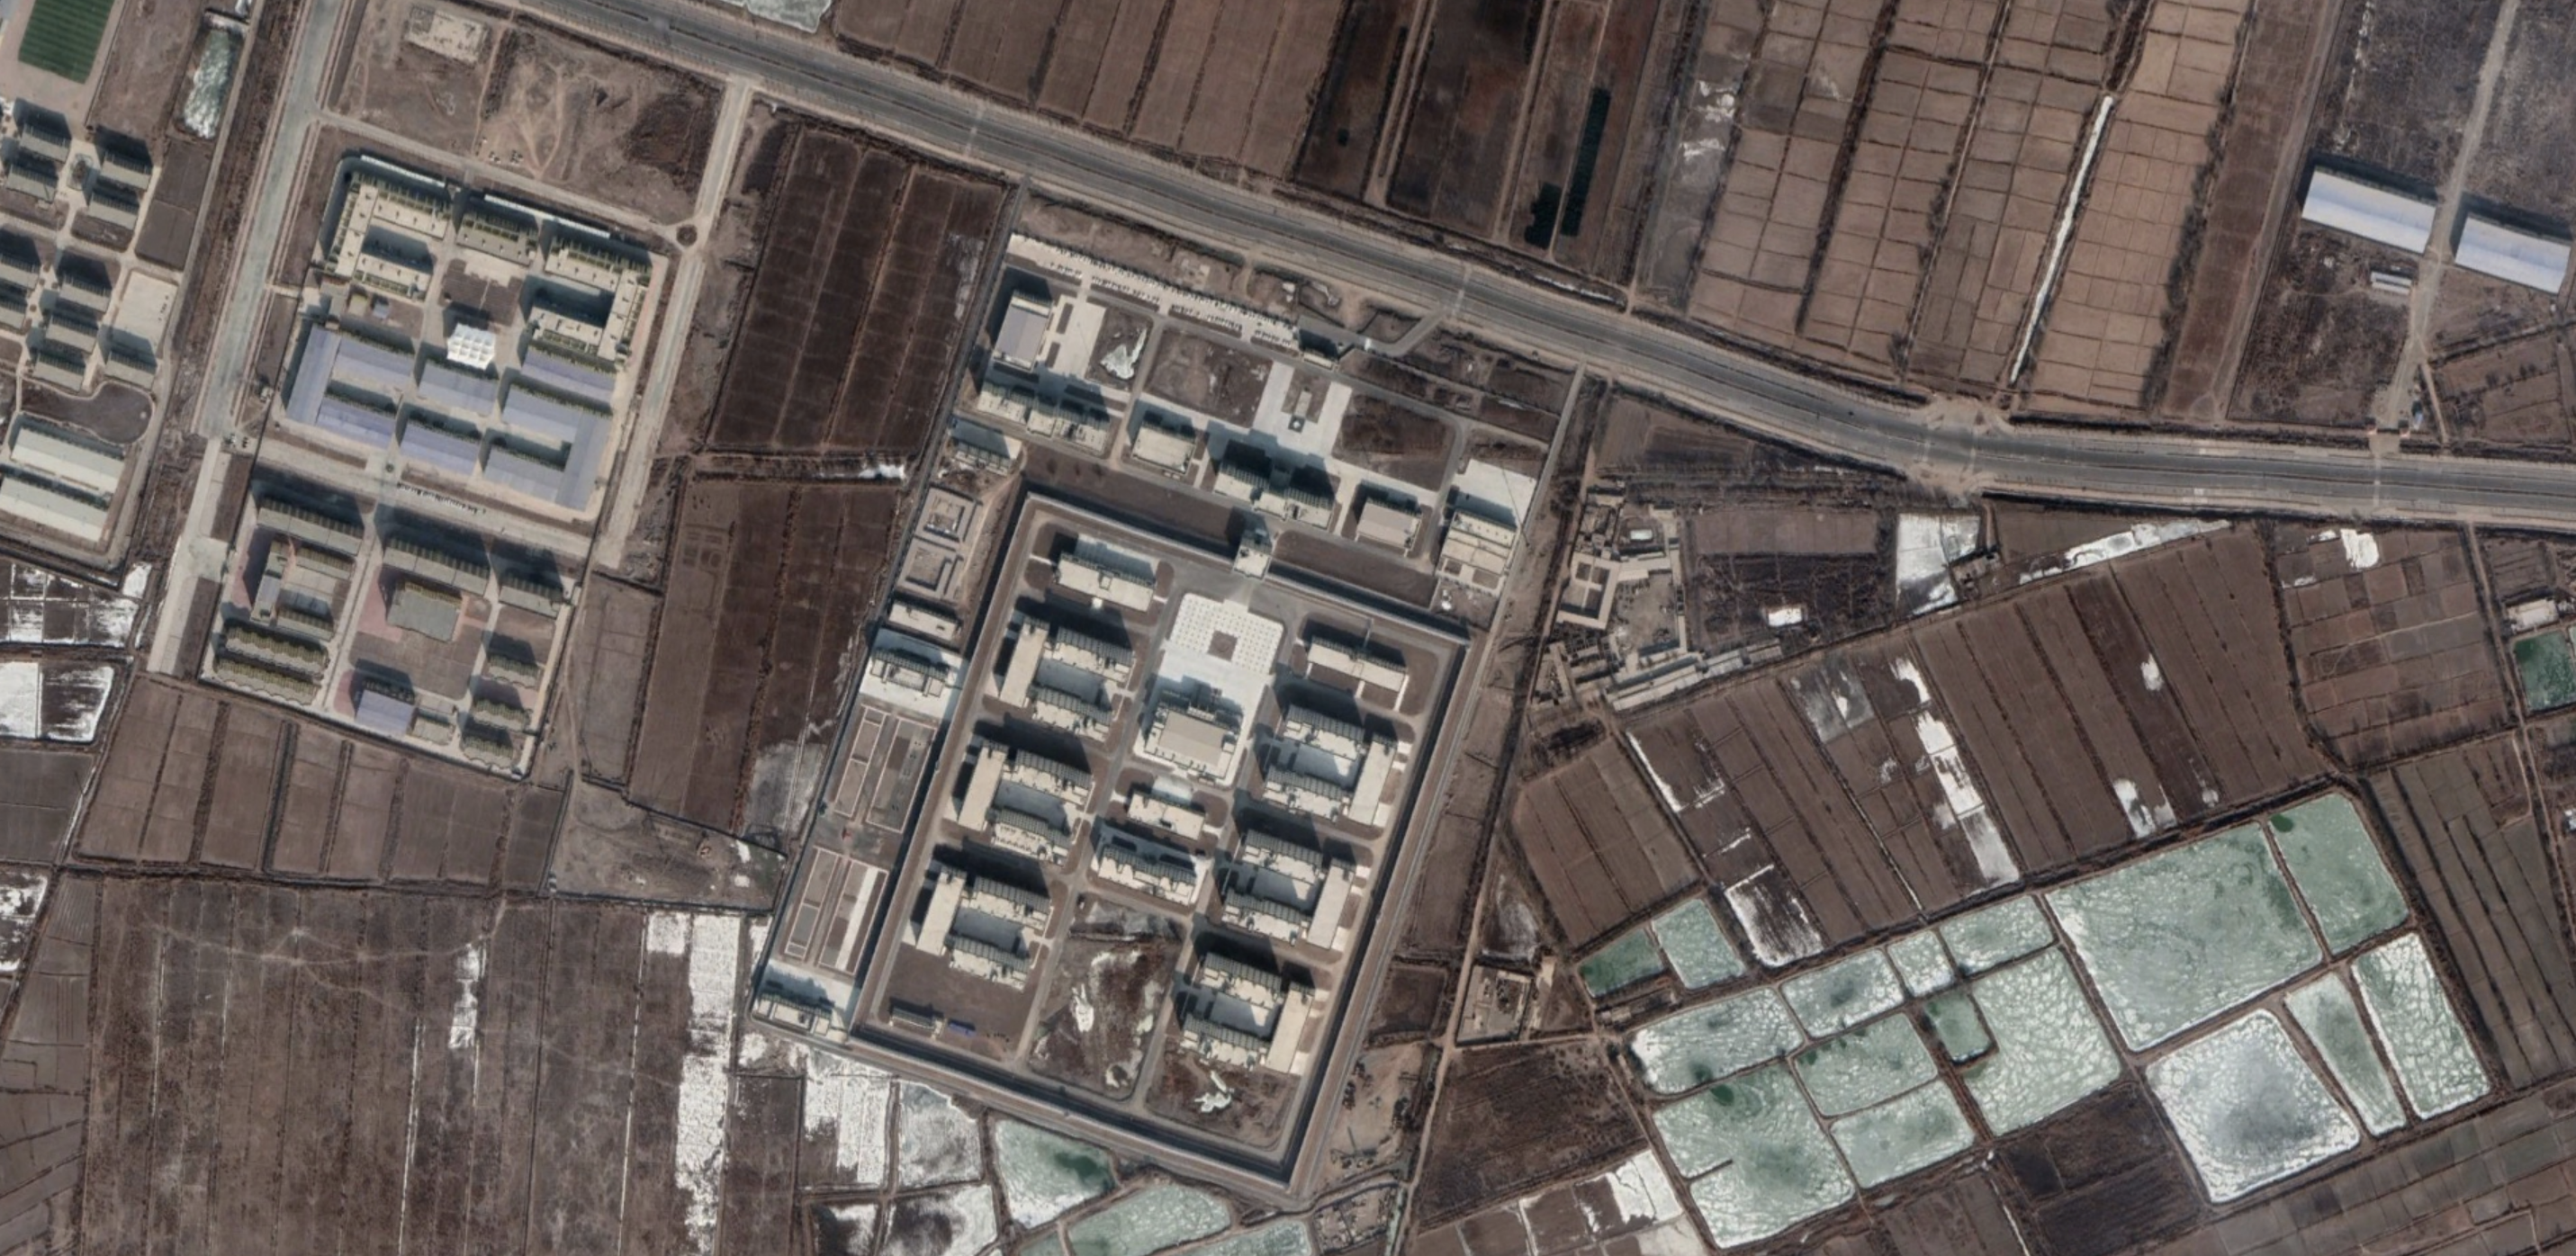 This massive new compound in the county of Shufu is capable of housing 10,000 people. There are many others. January 29, 2020. Image courtesy of BuzzFeed News. China, 2020.